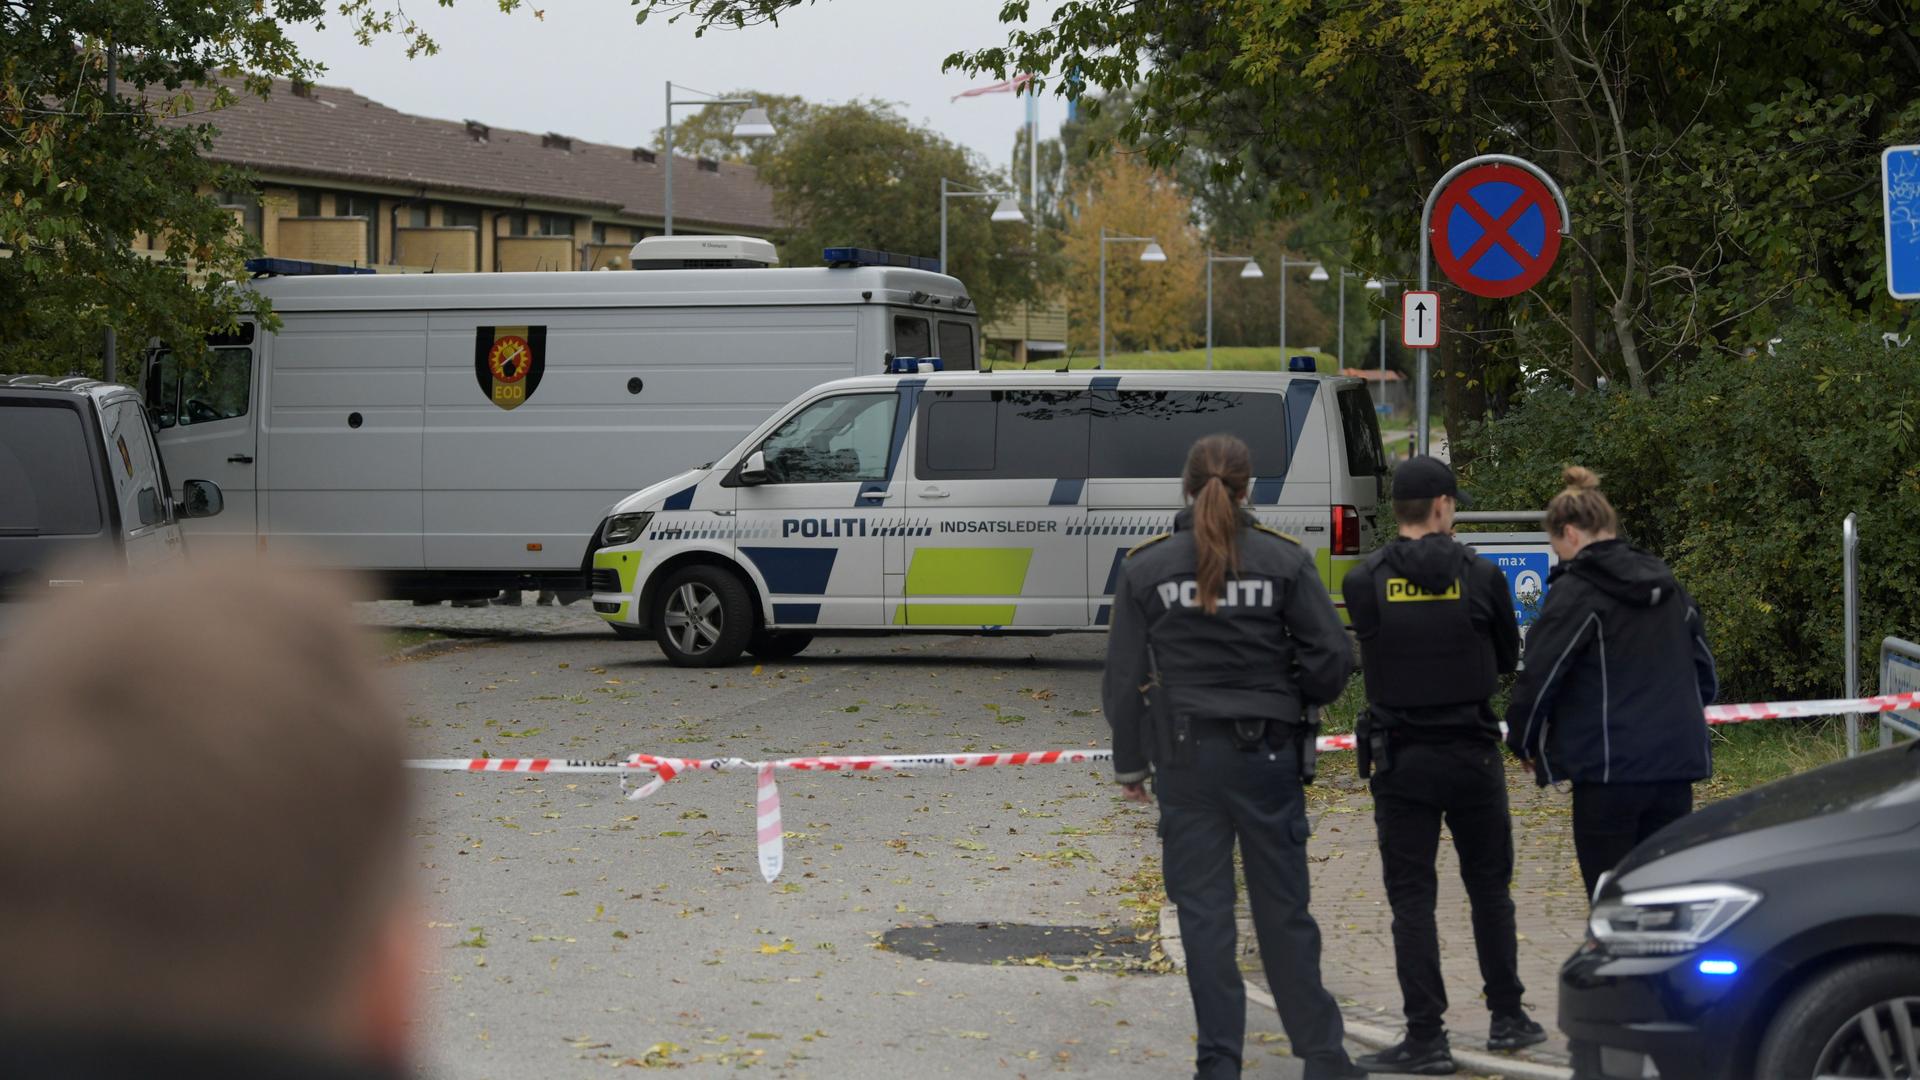 Police officers are seen as Peter Madsen (not pictured) is surrounded by the police in Albertslund, Denmark, Oct. 20, 2020.